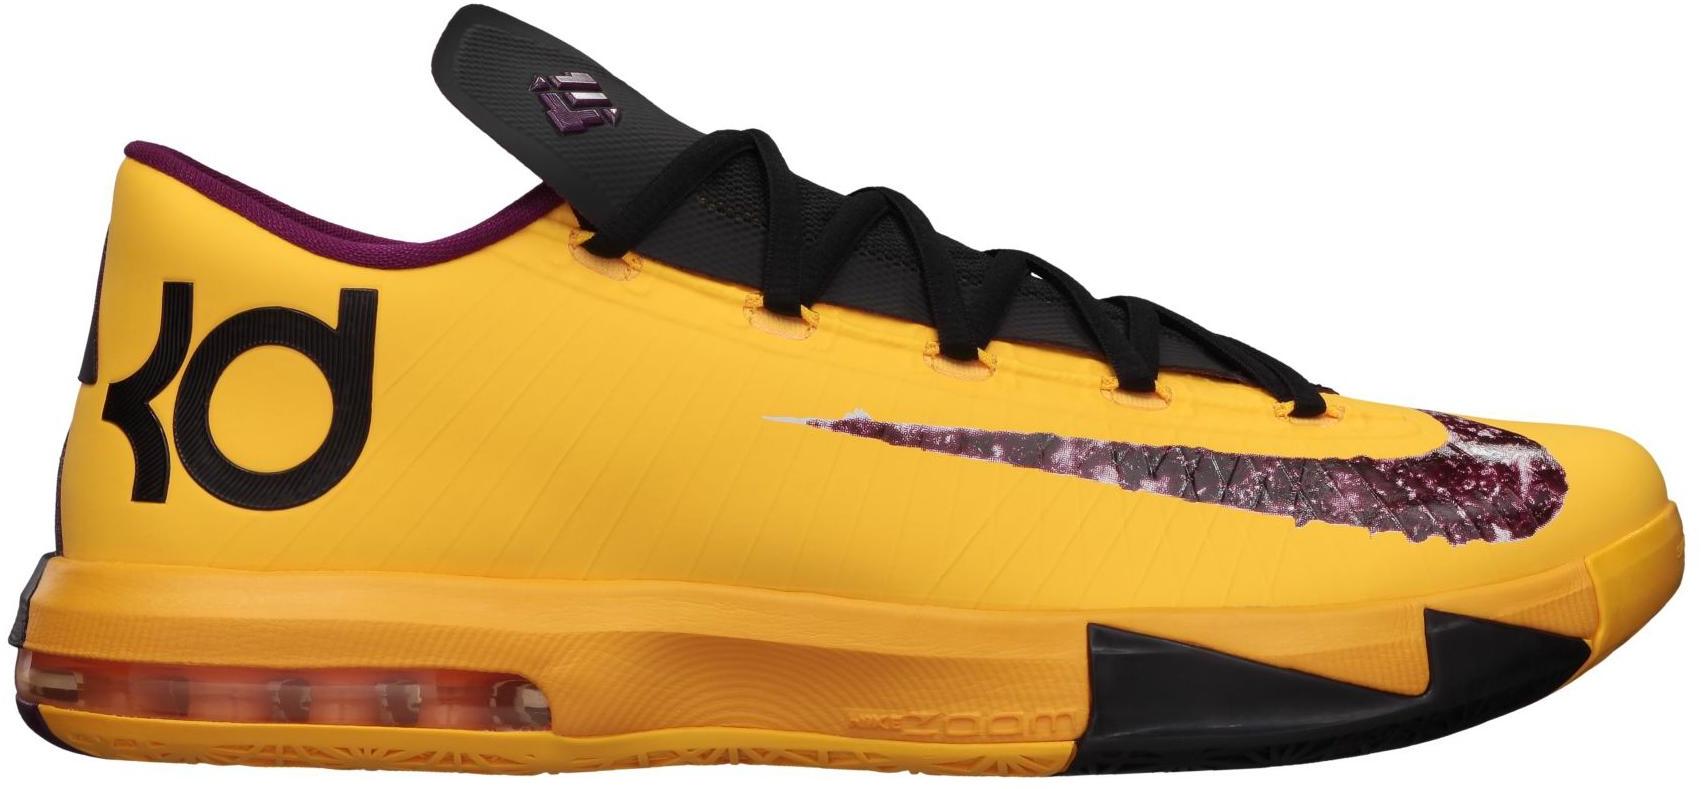 peanut butter and jelly kds